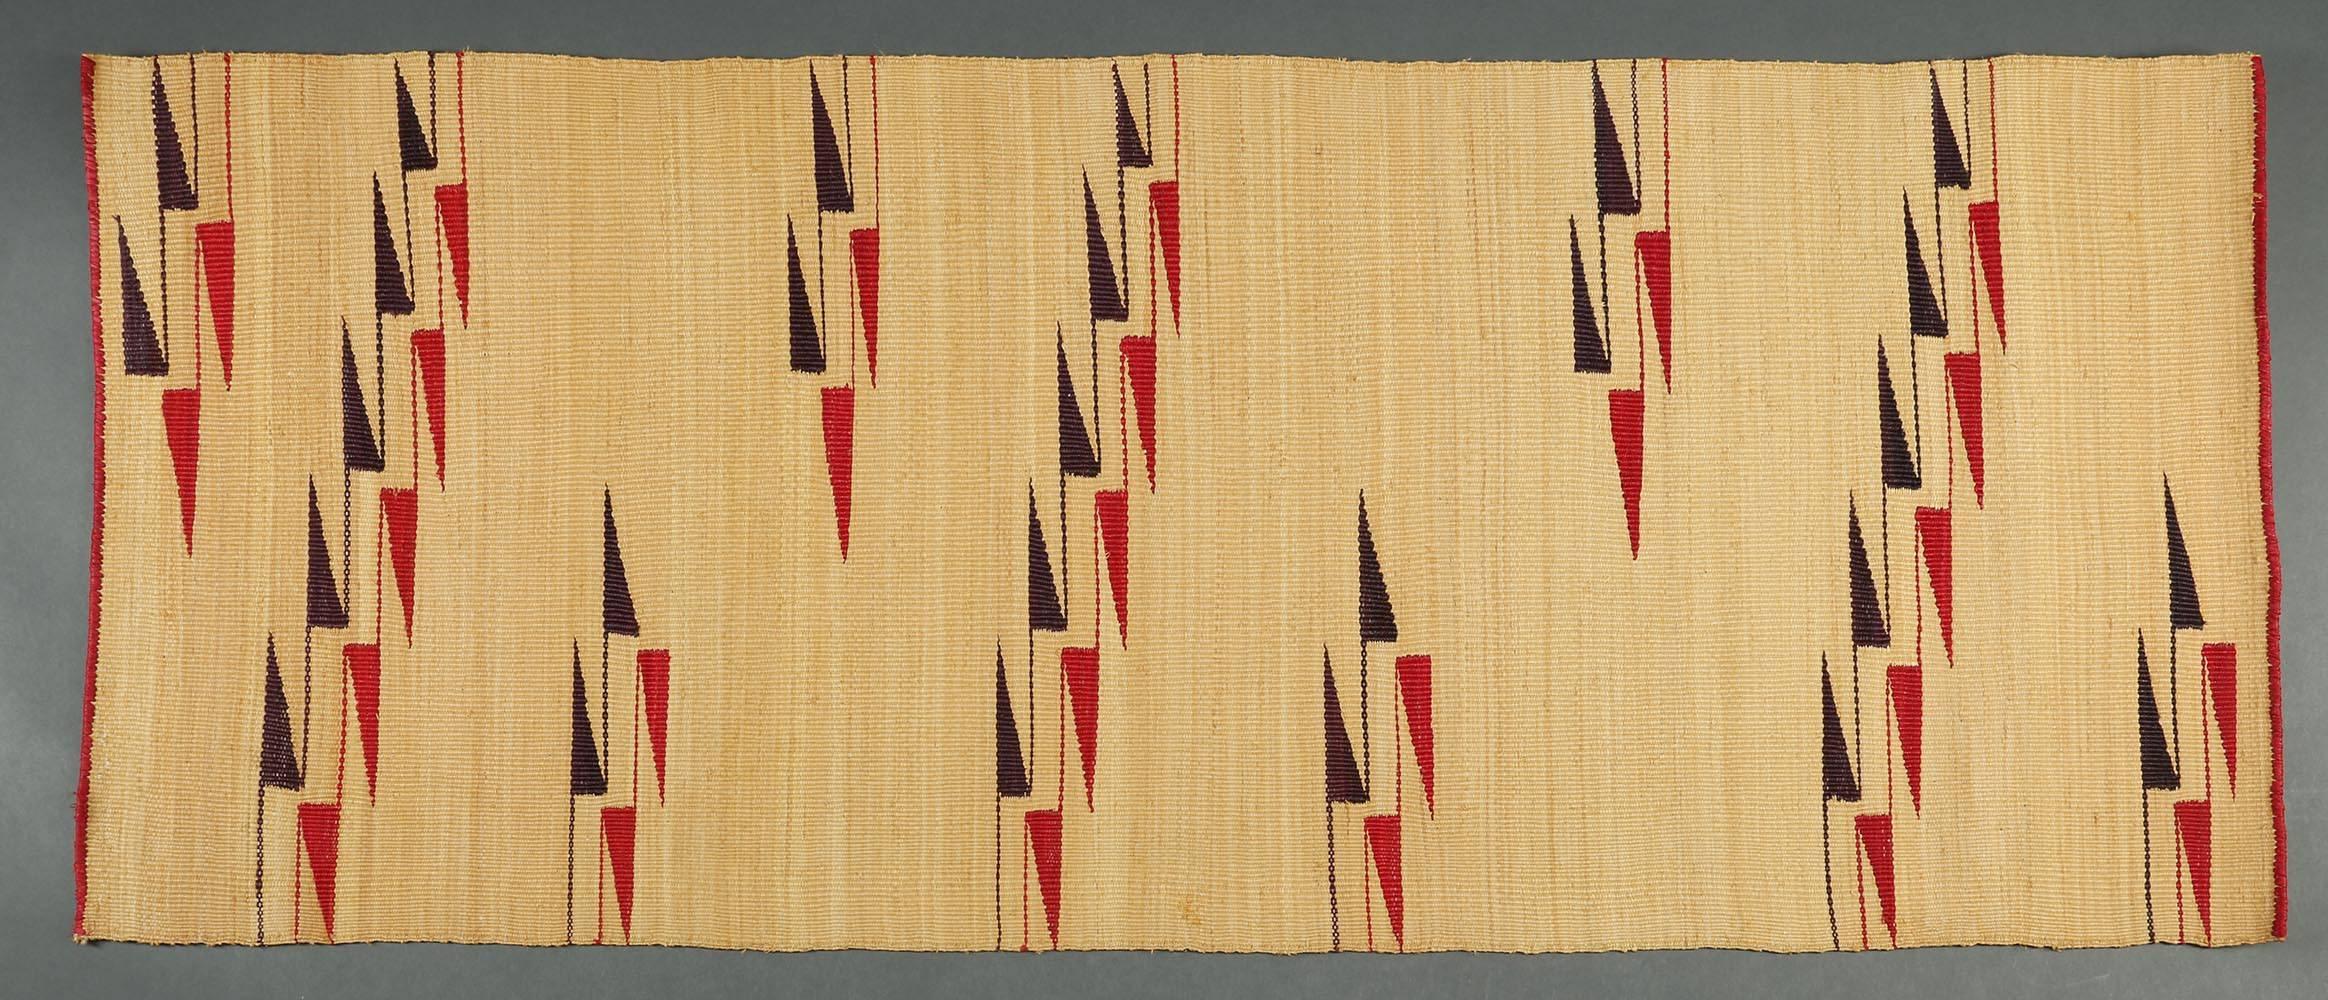 A strikingly modern geometric design woven flat mat by the Tutsi People of Rwanda, Africa. Red and black geometric design on a tan background. This decorative mat reflects the fine weaving quality the Tutsi are known for, similar to their popular